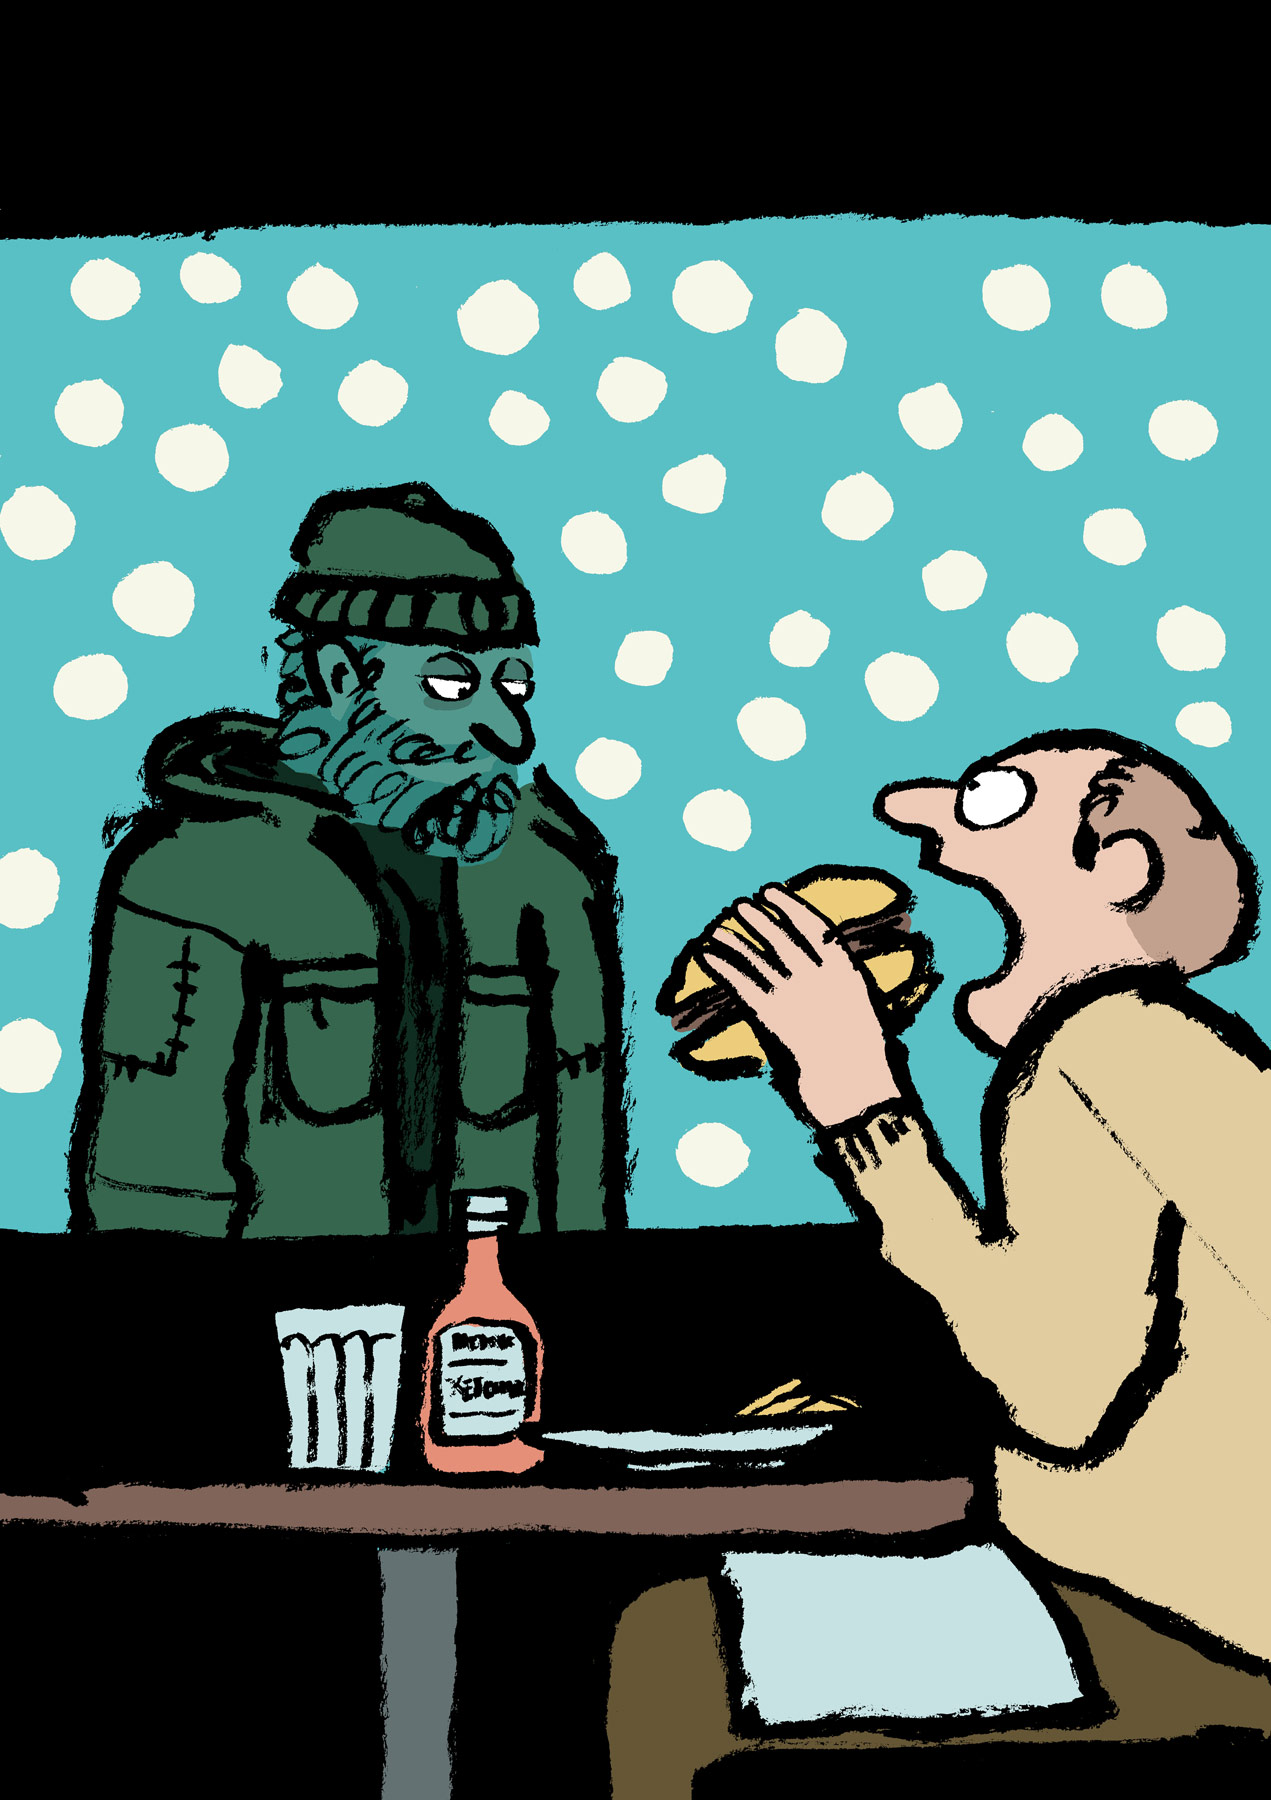 At the Diner: A man eating a burger with a homeless person looking in through the window